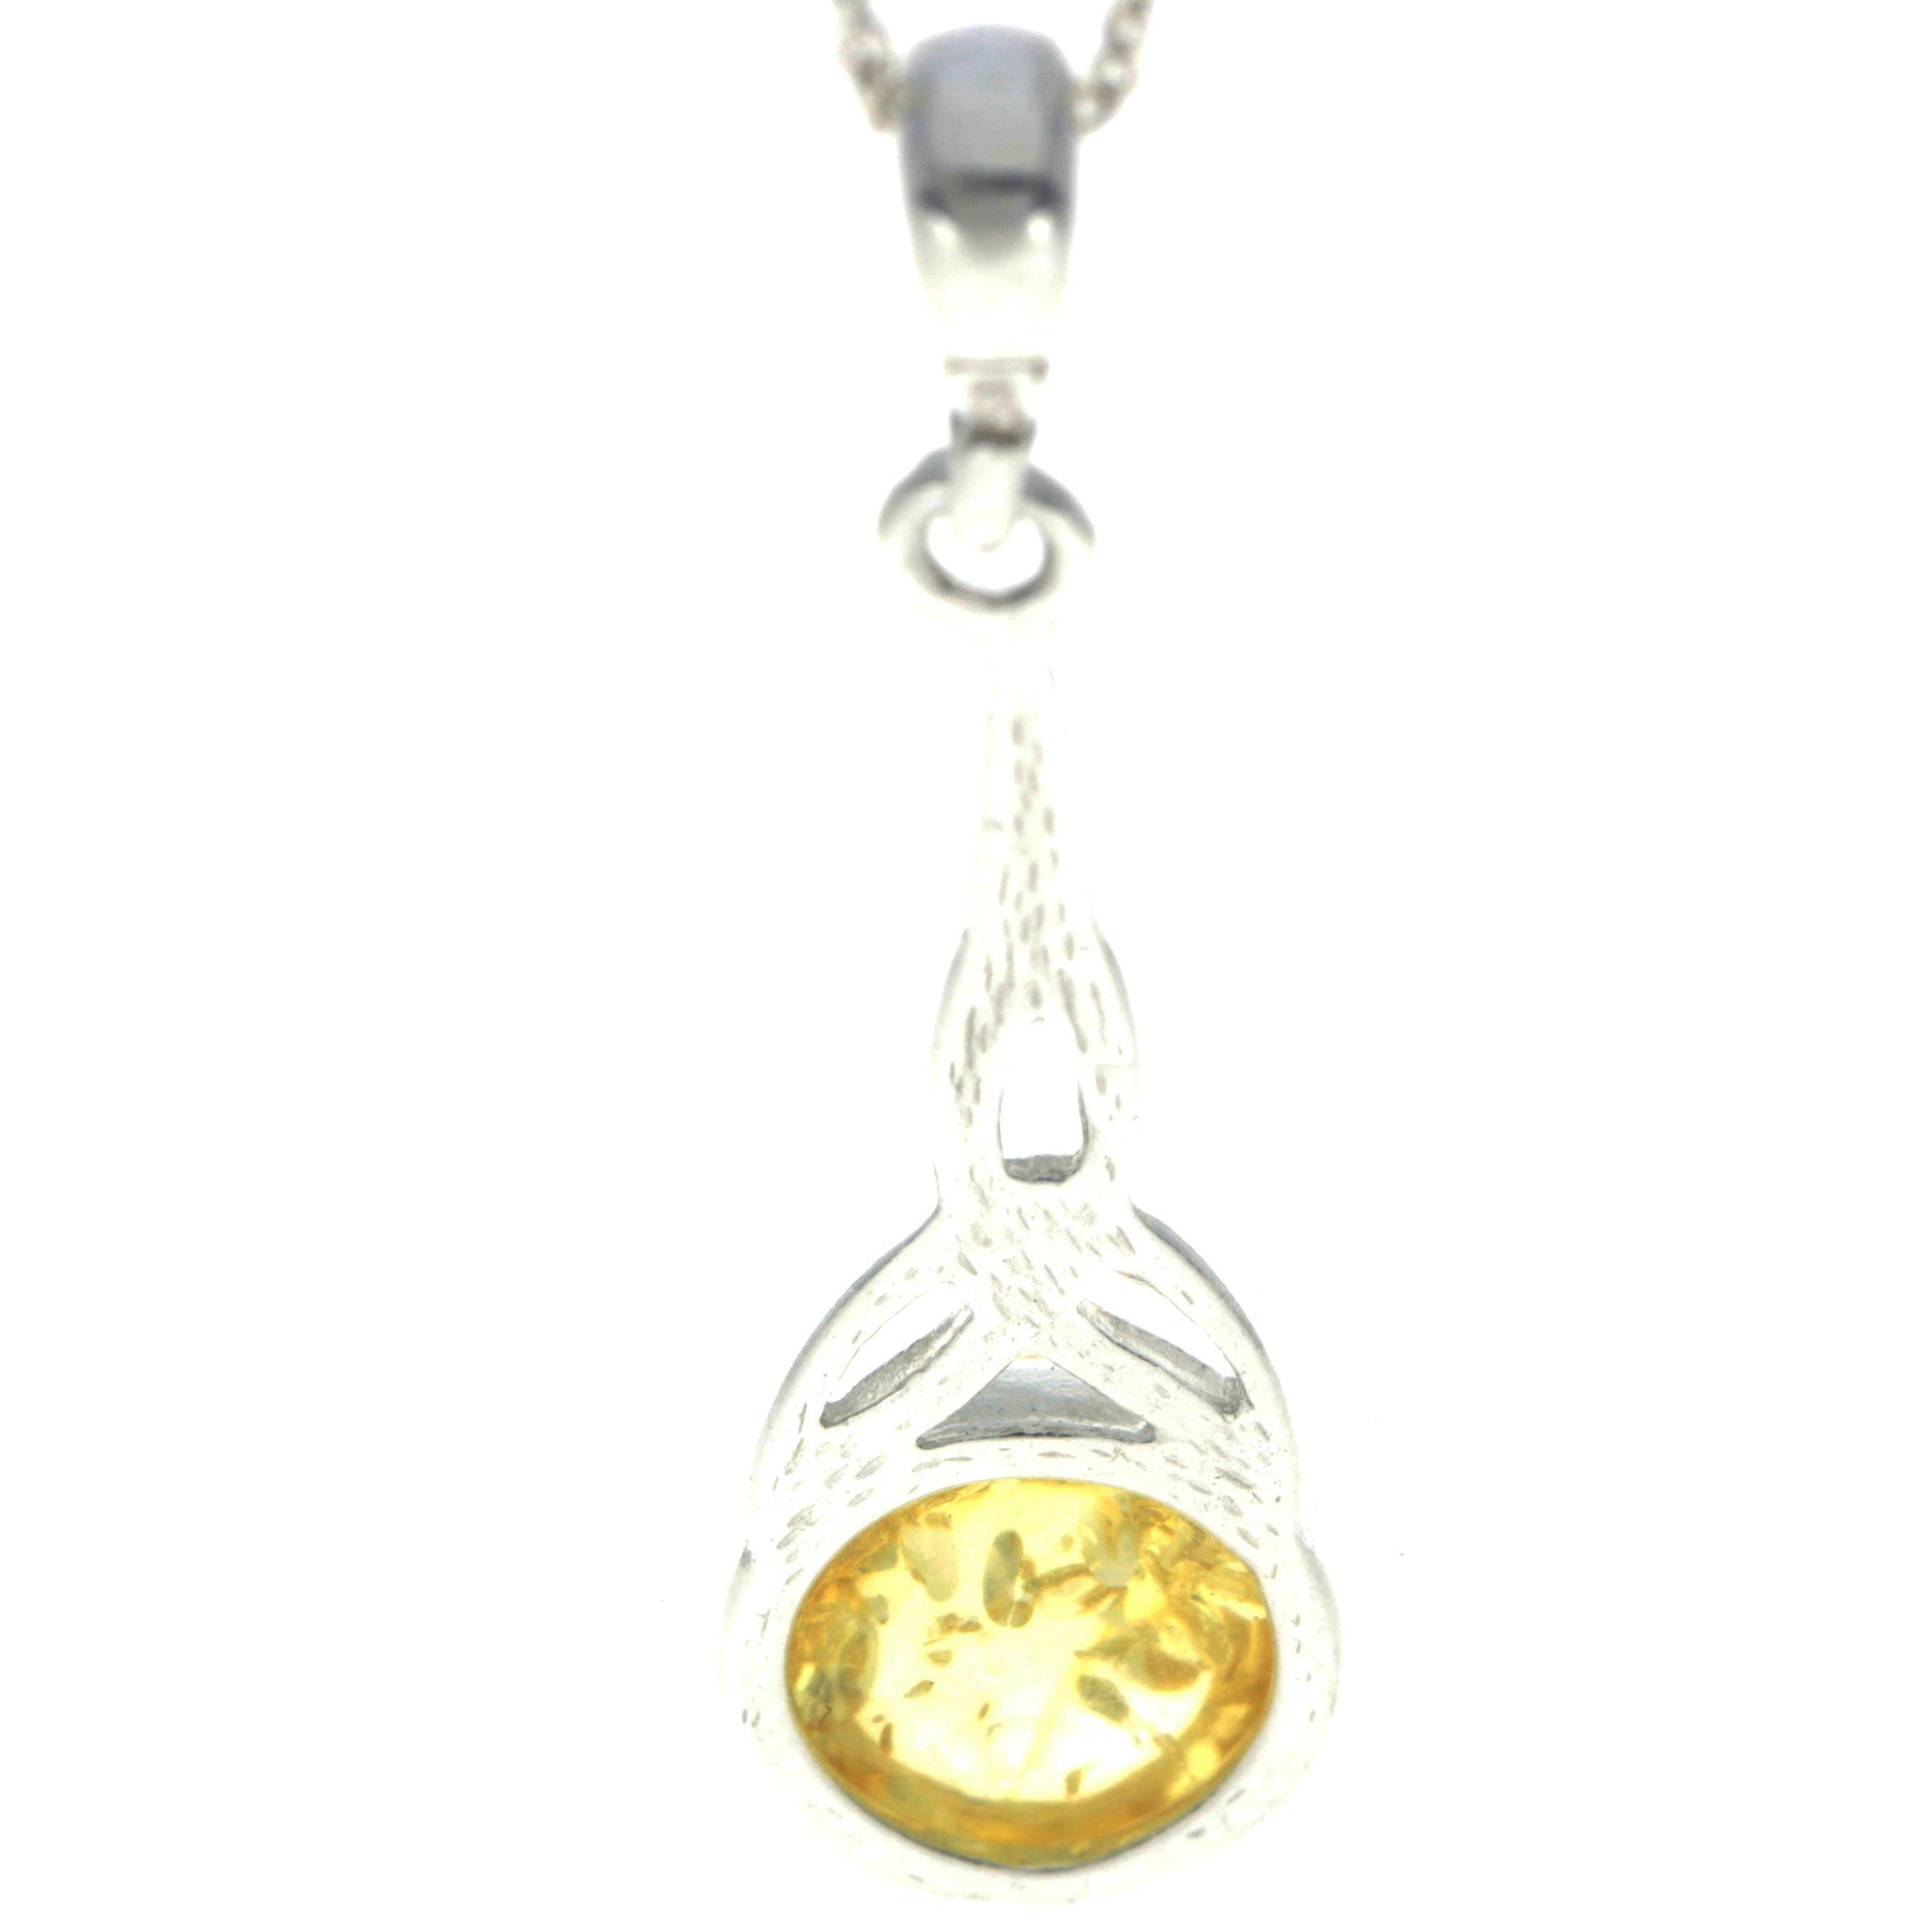 Long 925 Sterling Silver and Round Amber Celtic Pendant - 708